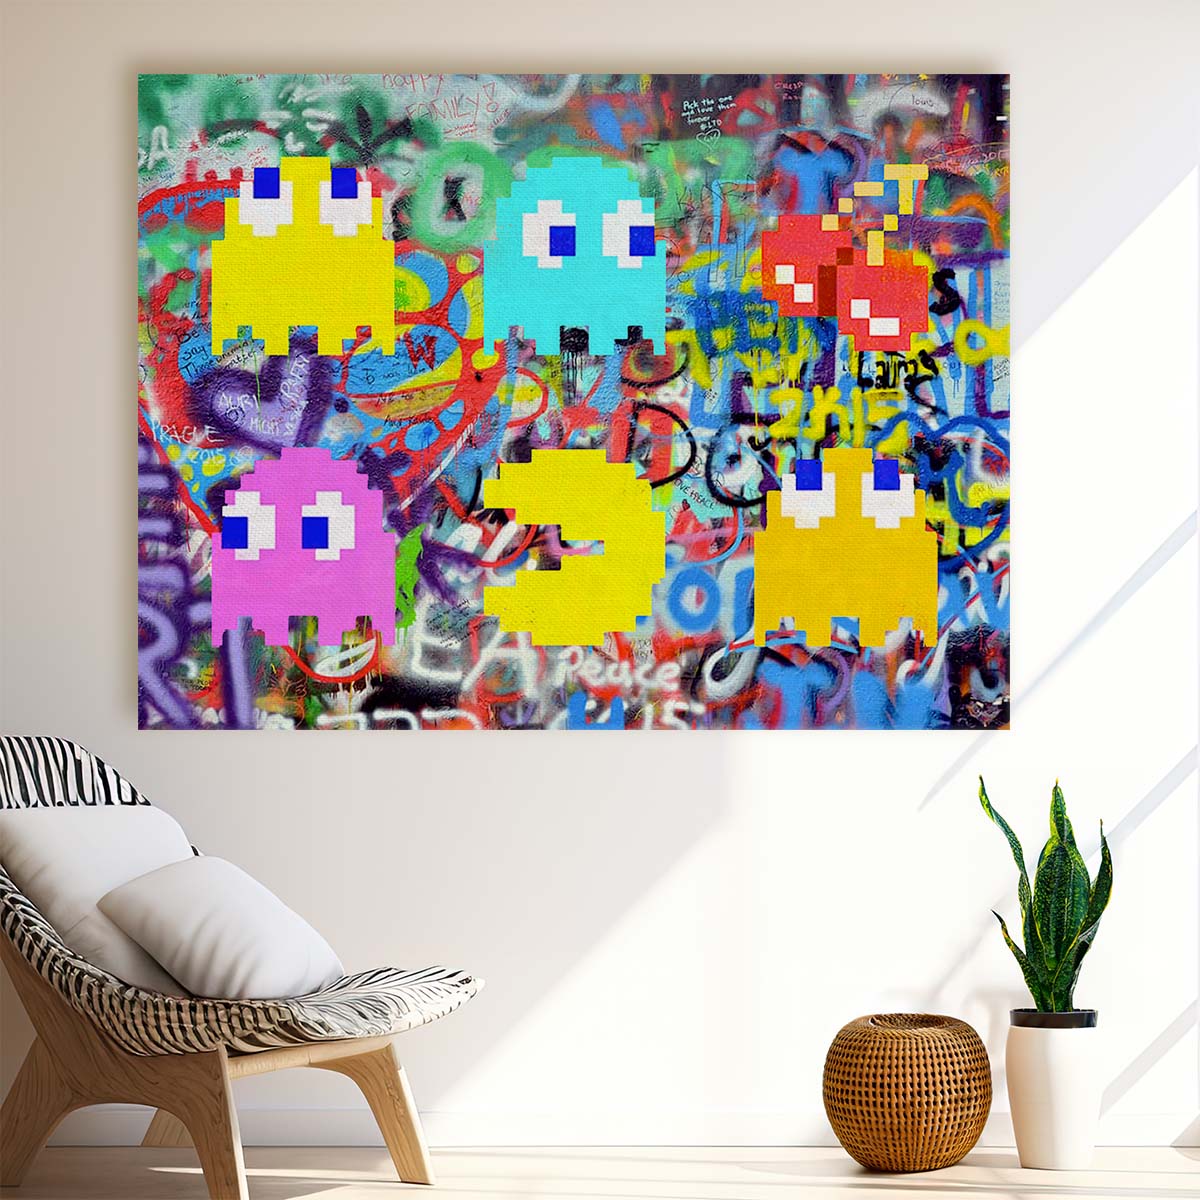 Pacman Graffiti Wall Art by Luxuriance Designs. Made in USA.